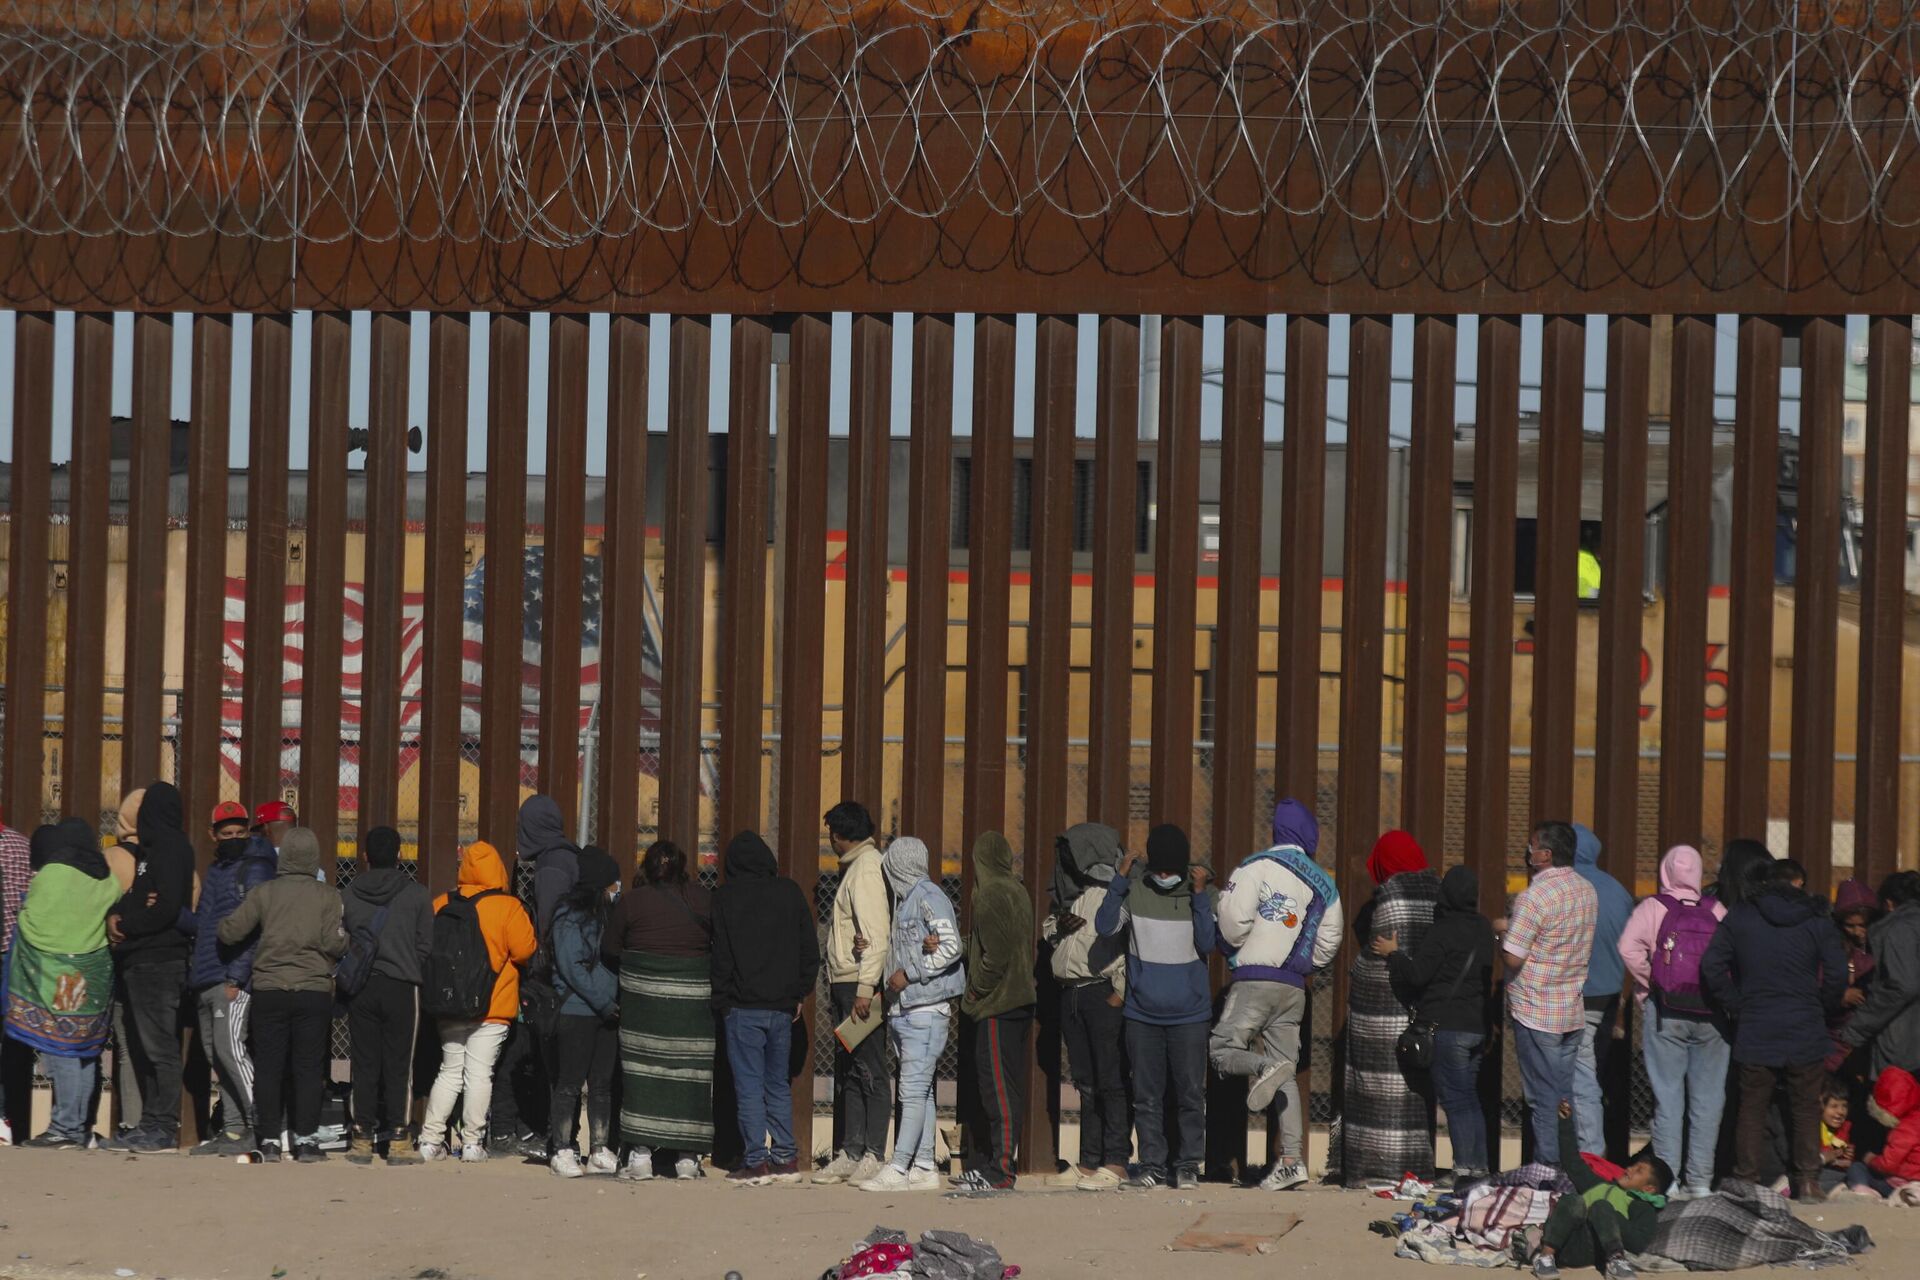 Migrants queue at the border wall to be received by Border Patrol agents after crossing the Rio Bravo river (or Rio Grande river, as it is called in the US) from Ciudad Juarez, Chihuahua state, Mexico to El Paso, Texas, US on December 21, 2022 - Sputnik International, 1920, 26.12.2022